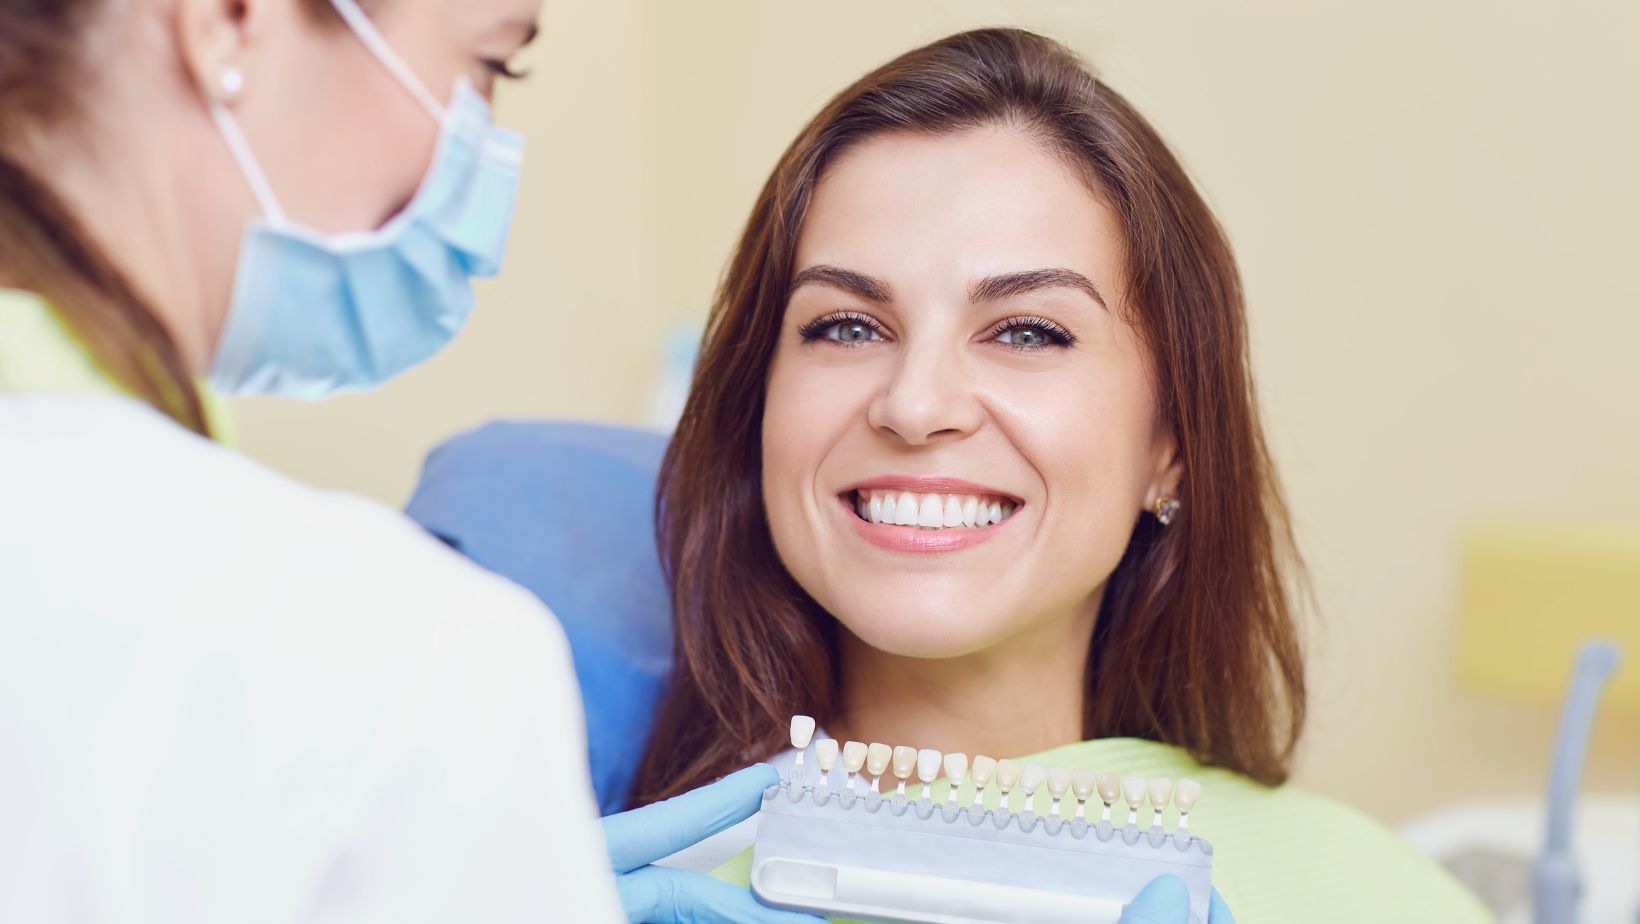 What Teeth Whitening Products Do Dentists Use?